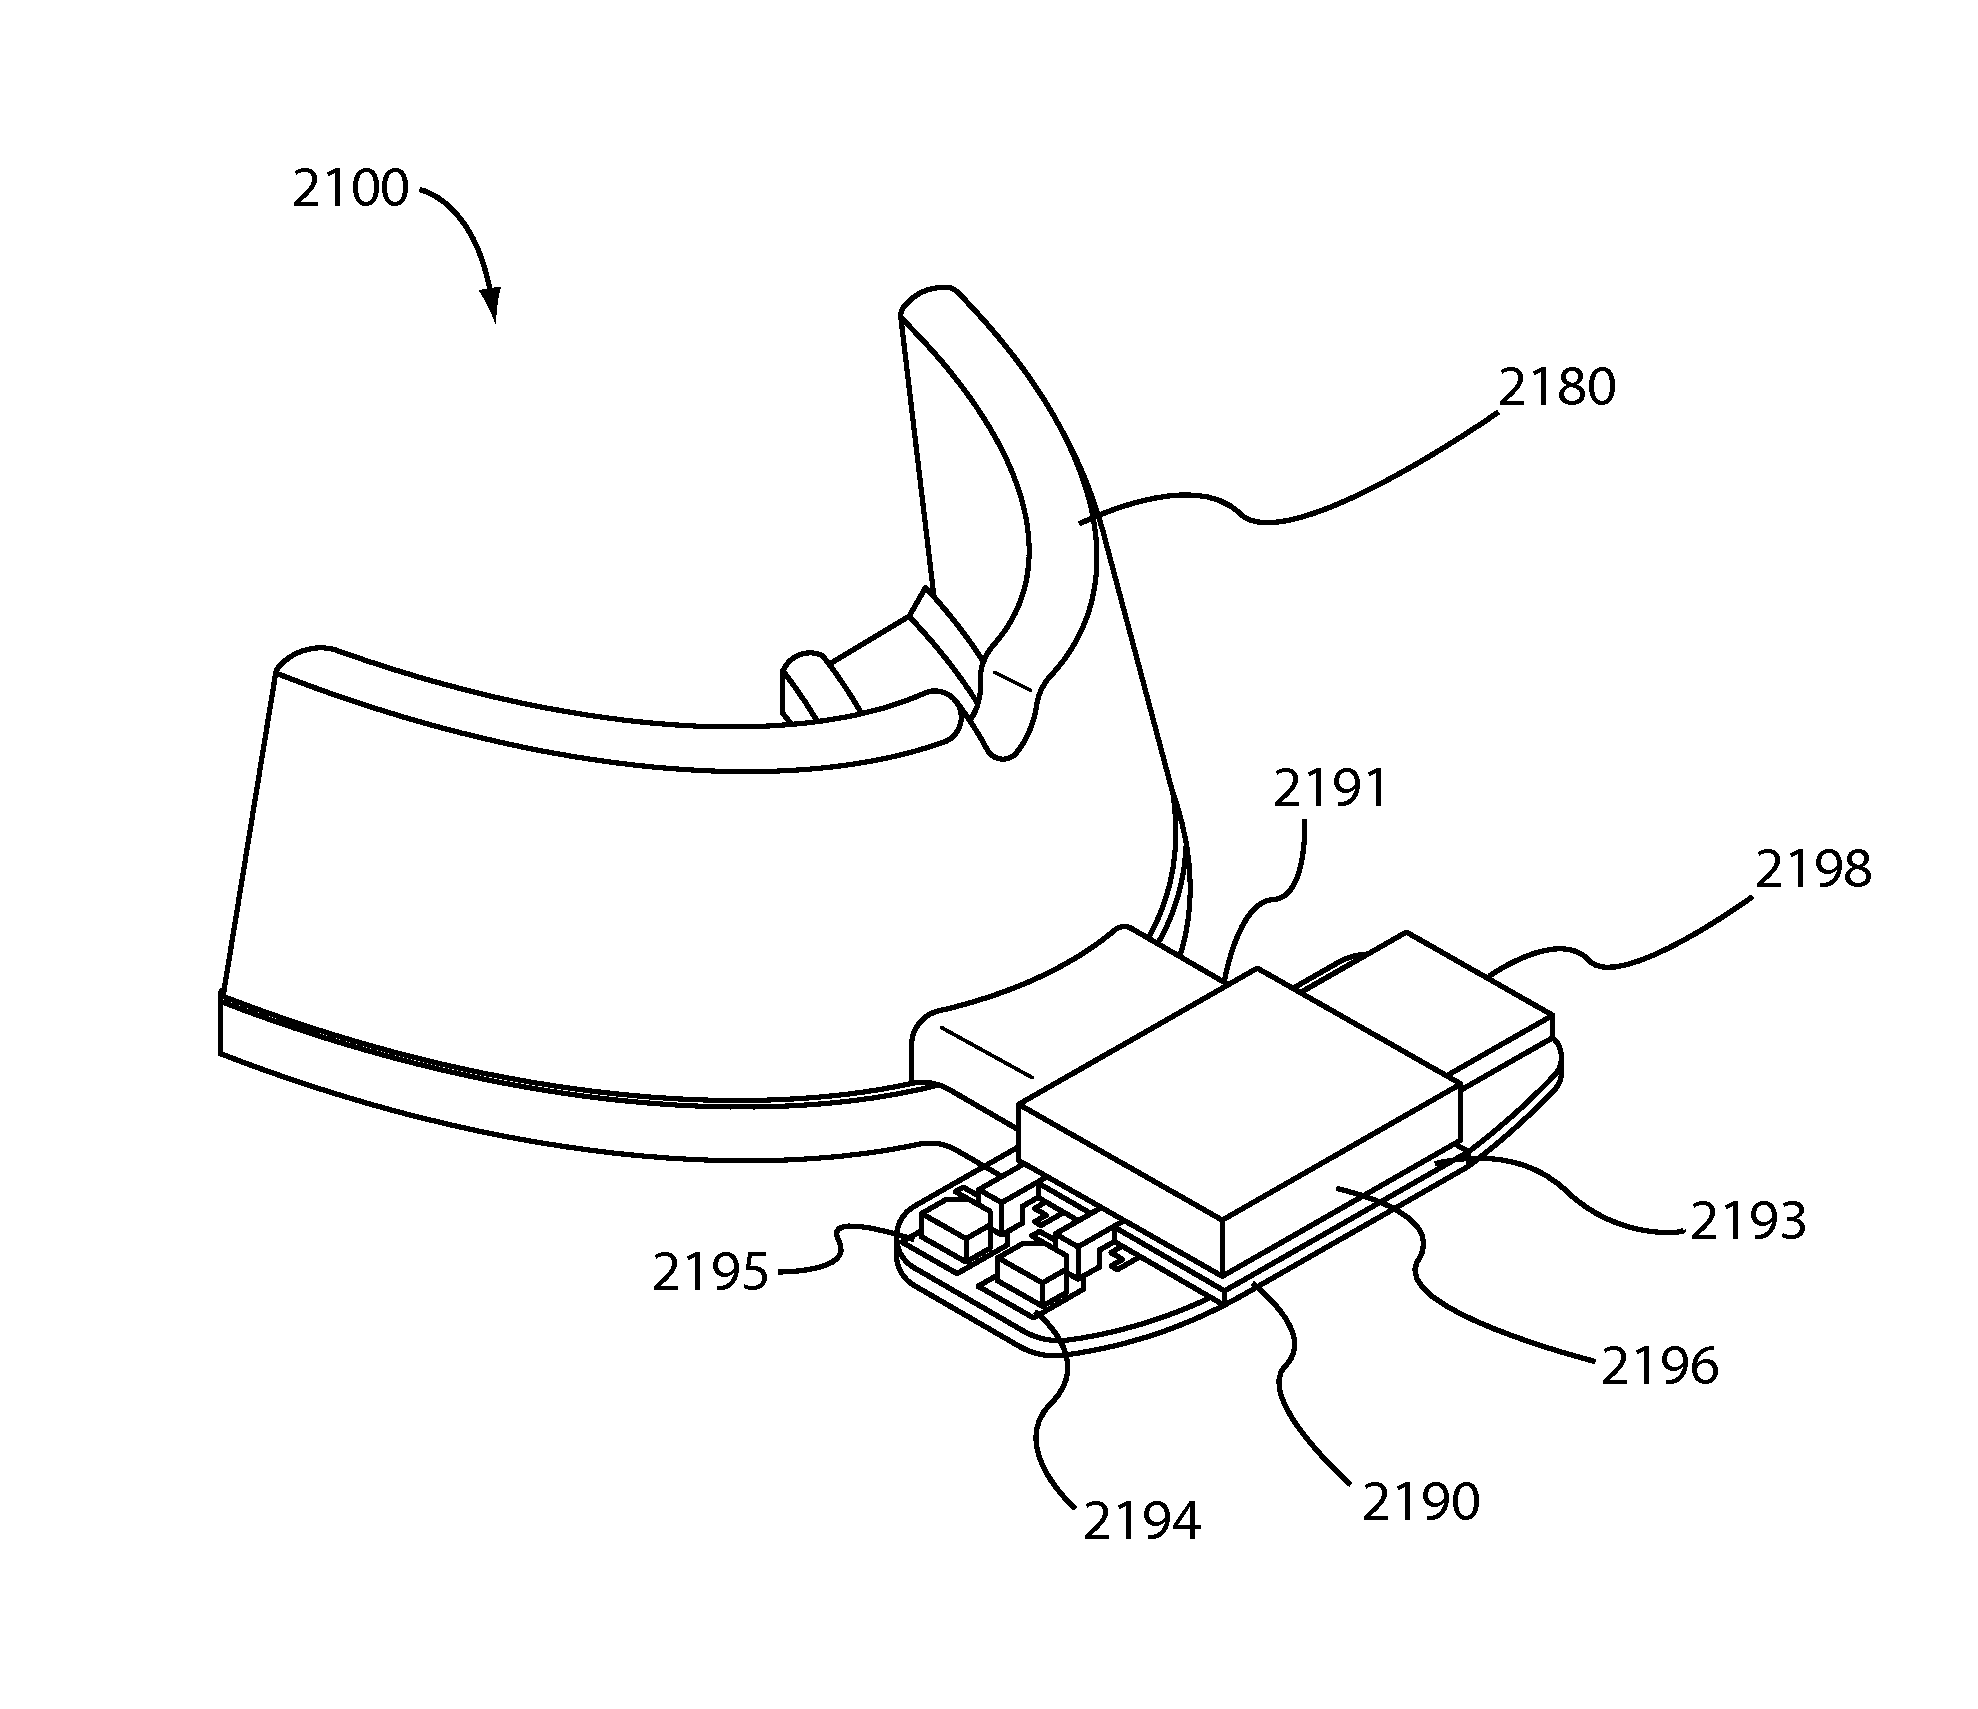 Intra-oral light therapy apparatuses and methods for their use